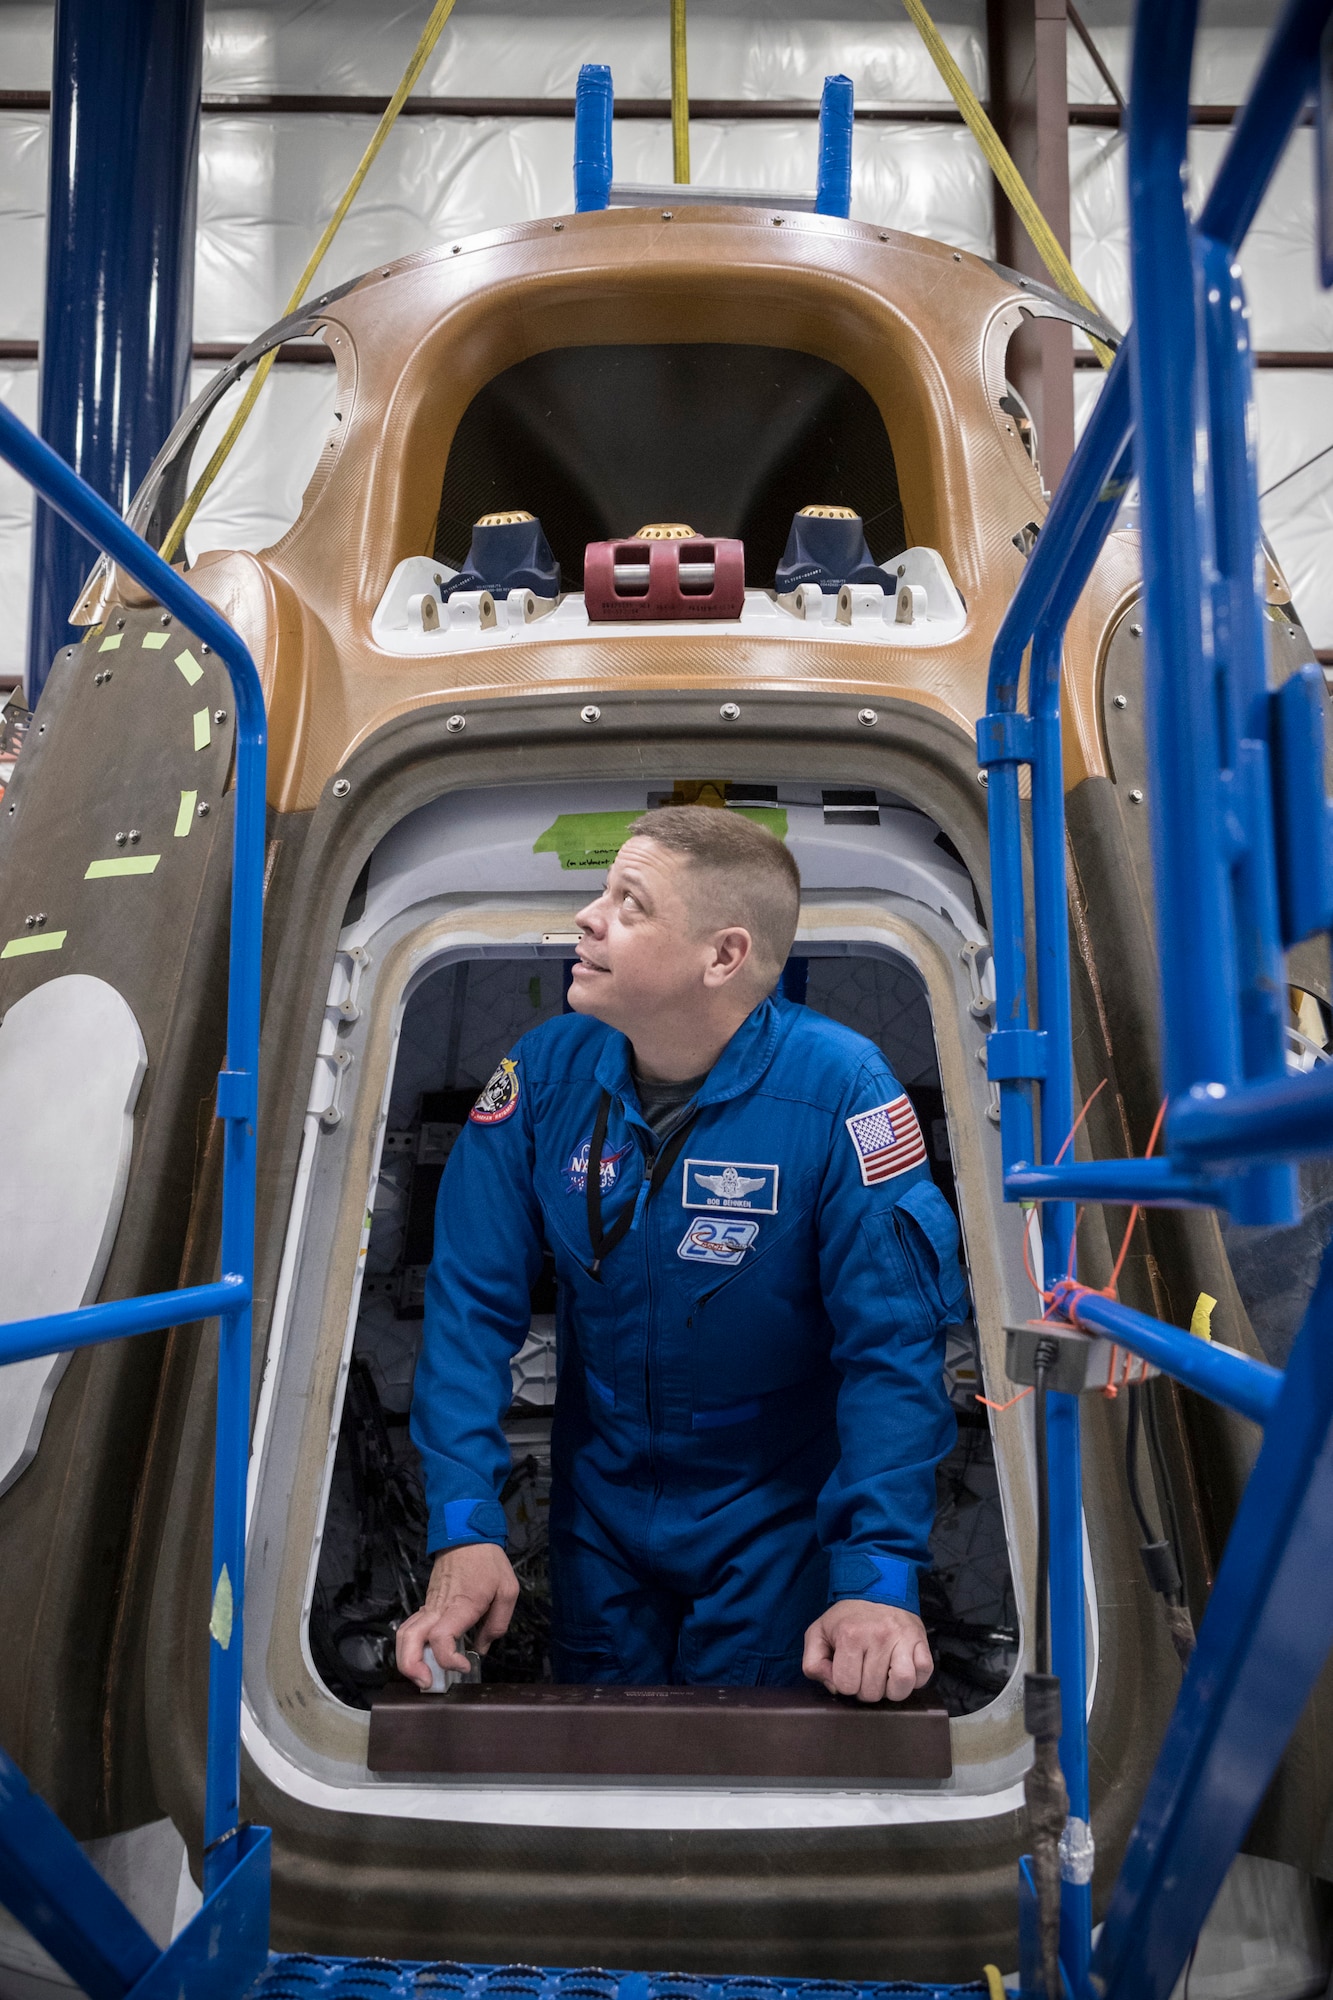 Astronaut USAF Col. Bob Behnken emerges from the hatch of a SpaceX Crew Dragon spacecraft being manufactured at SpaceX's headquarters and factory in Hawthorne, California, March 8, 2017. Behnken is one of four NASA astronauts selected to train with Boeing and SpaceX ahead of flight tests for NASA's Commercial Crew Program to develop launch vehicles to take astronauts to the International Space Station. (Photo/SpaceX)